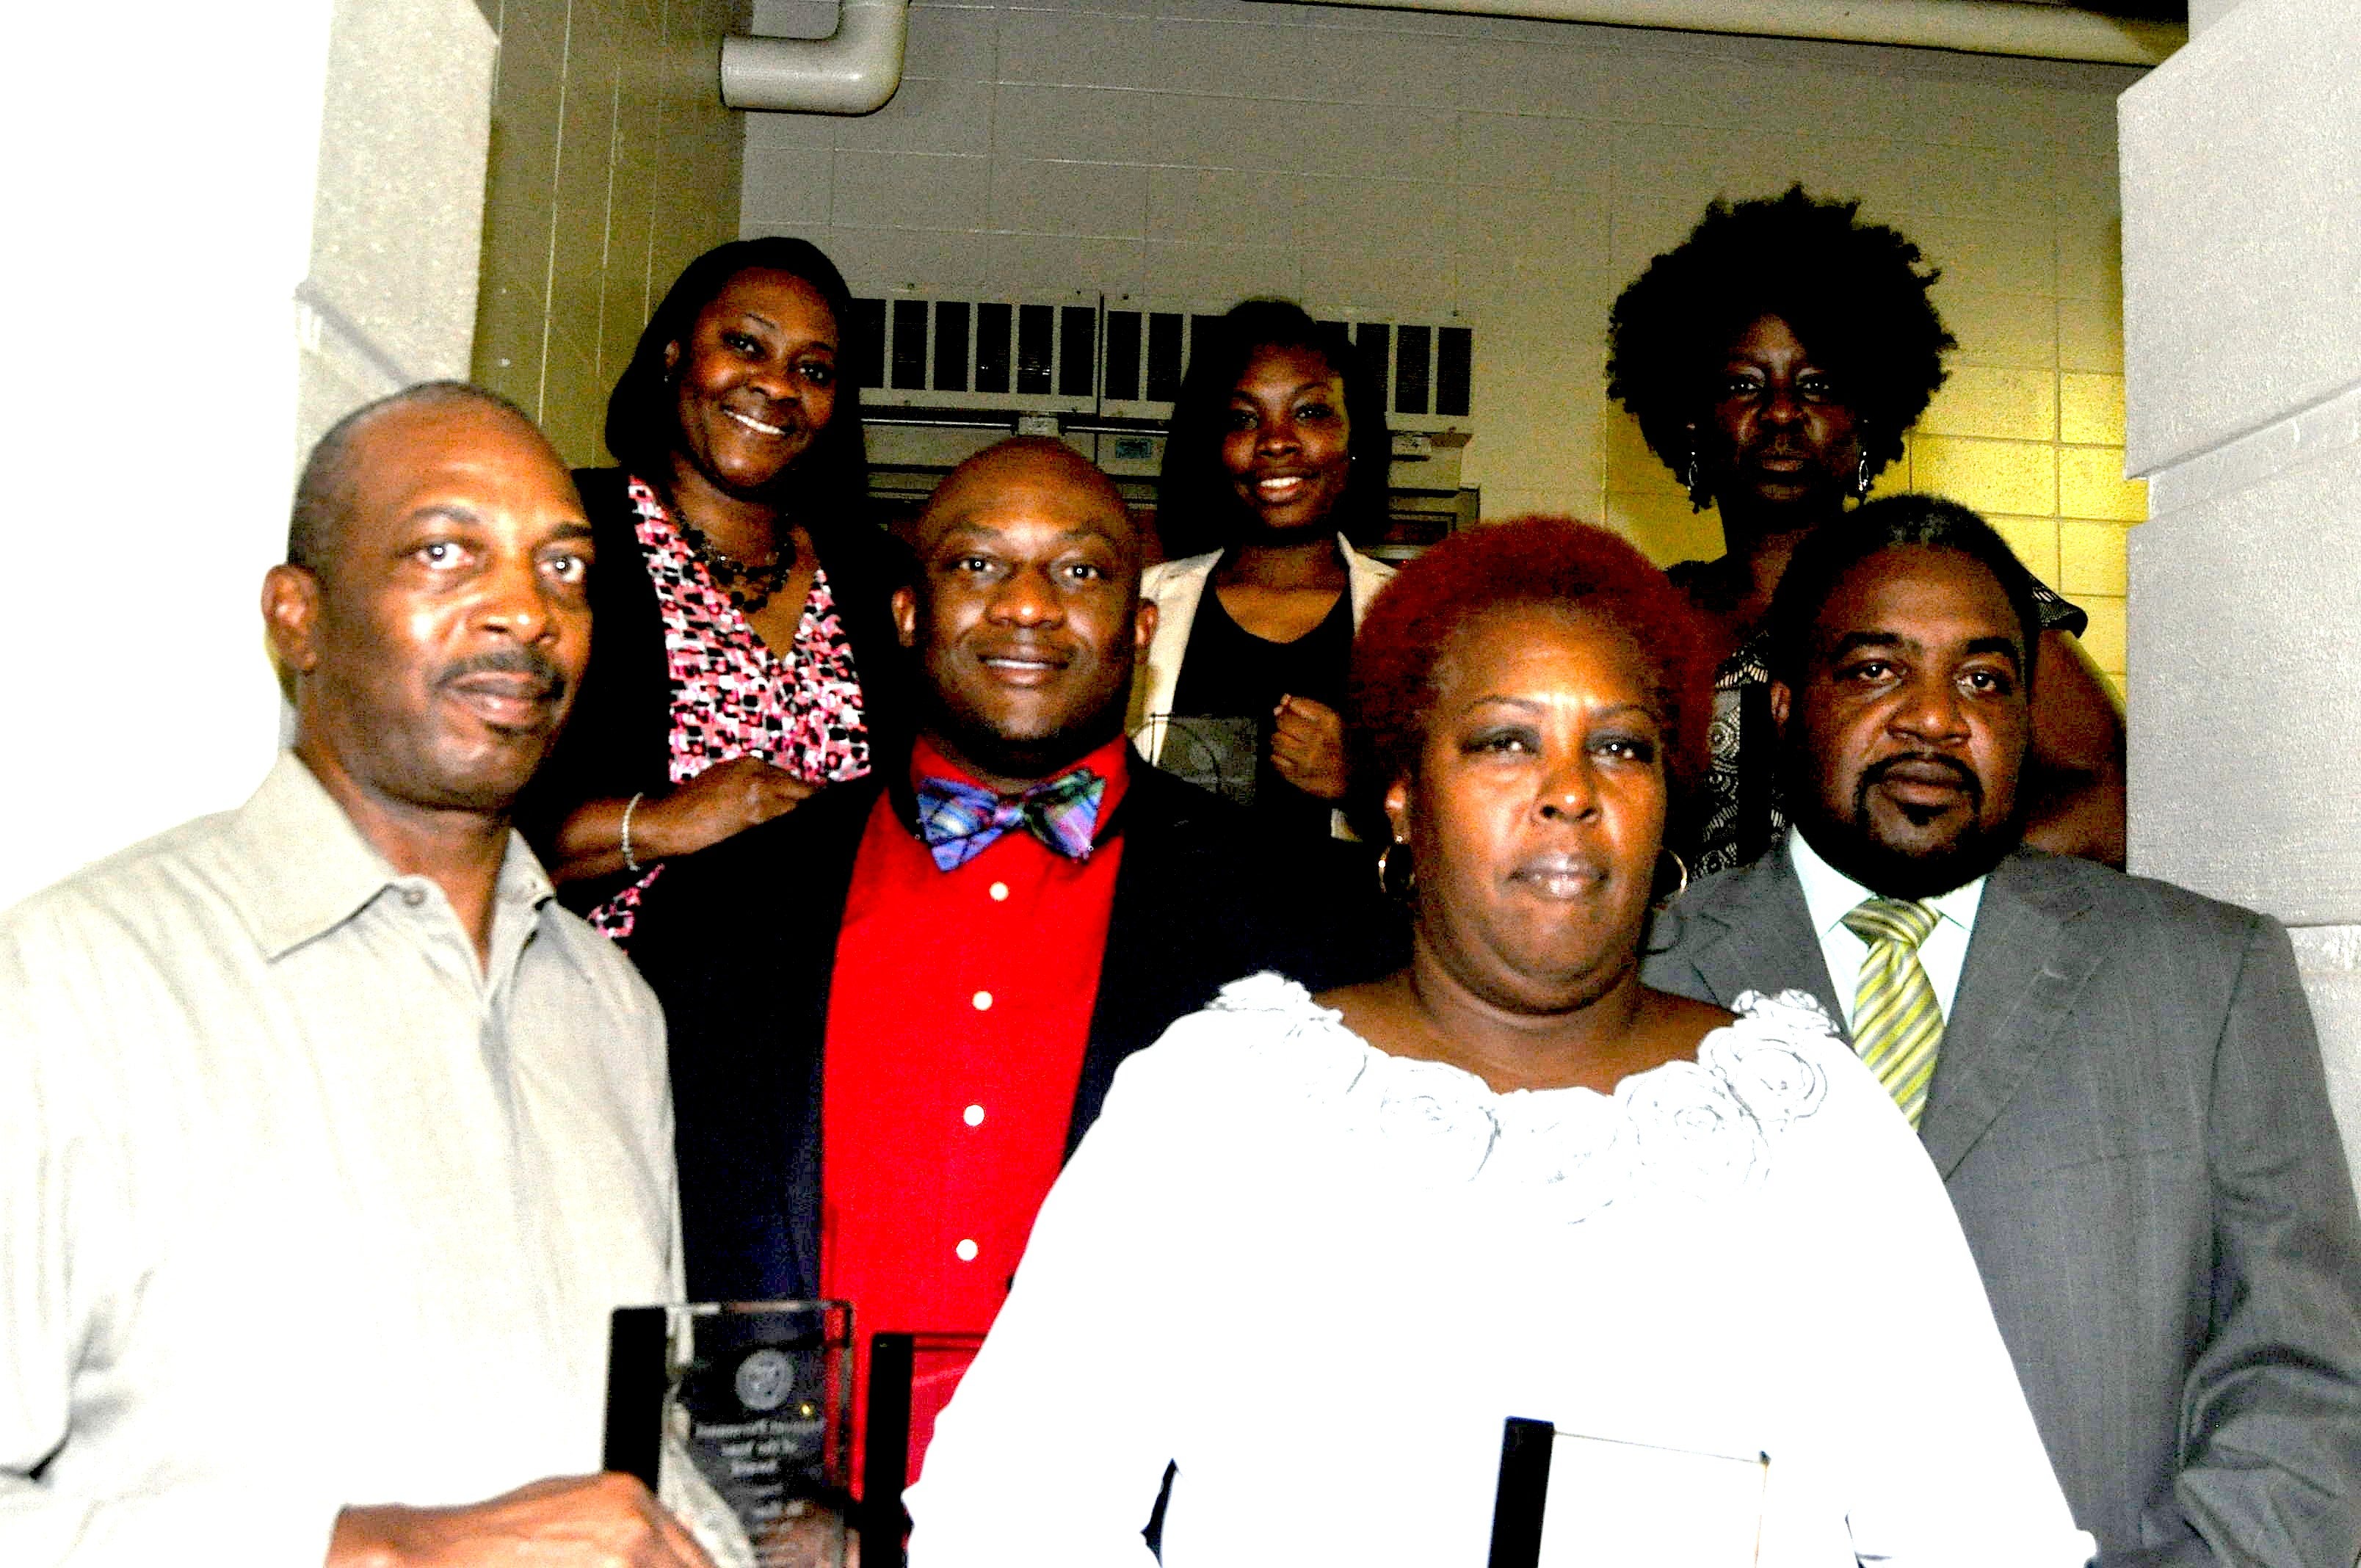 The Lowndes County Board of Education and Lowndes County Education Association recognized yearly award winners at their 10th recognition Gala at Central High Tuesday night. Pictured from left are: Support Personnel of the Year Henry Saffold of Calhoun School; Administrator of the Year Stacy H. Williams of the Central Office; Co-Principal of the Year Keith Scissum of Hayneville Middle School; Student of the Year Myaira Coleman of Central High; Volunteer of the Year Cynthia Moorer of Jackson-Steele Elementary; Teacher of the Year  Sheron Reid of Fort Deposit Elementary; Co-Principal of the Year Archie Curtis of Lowndes County Middle School. Not pictured is Parent or Guardian of the Year  Katanga Mants of Central High.